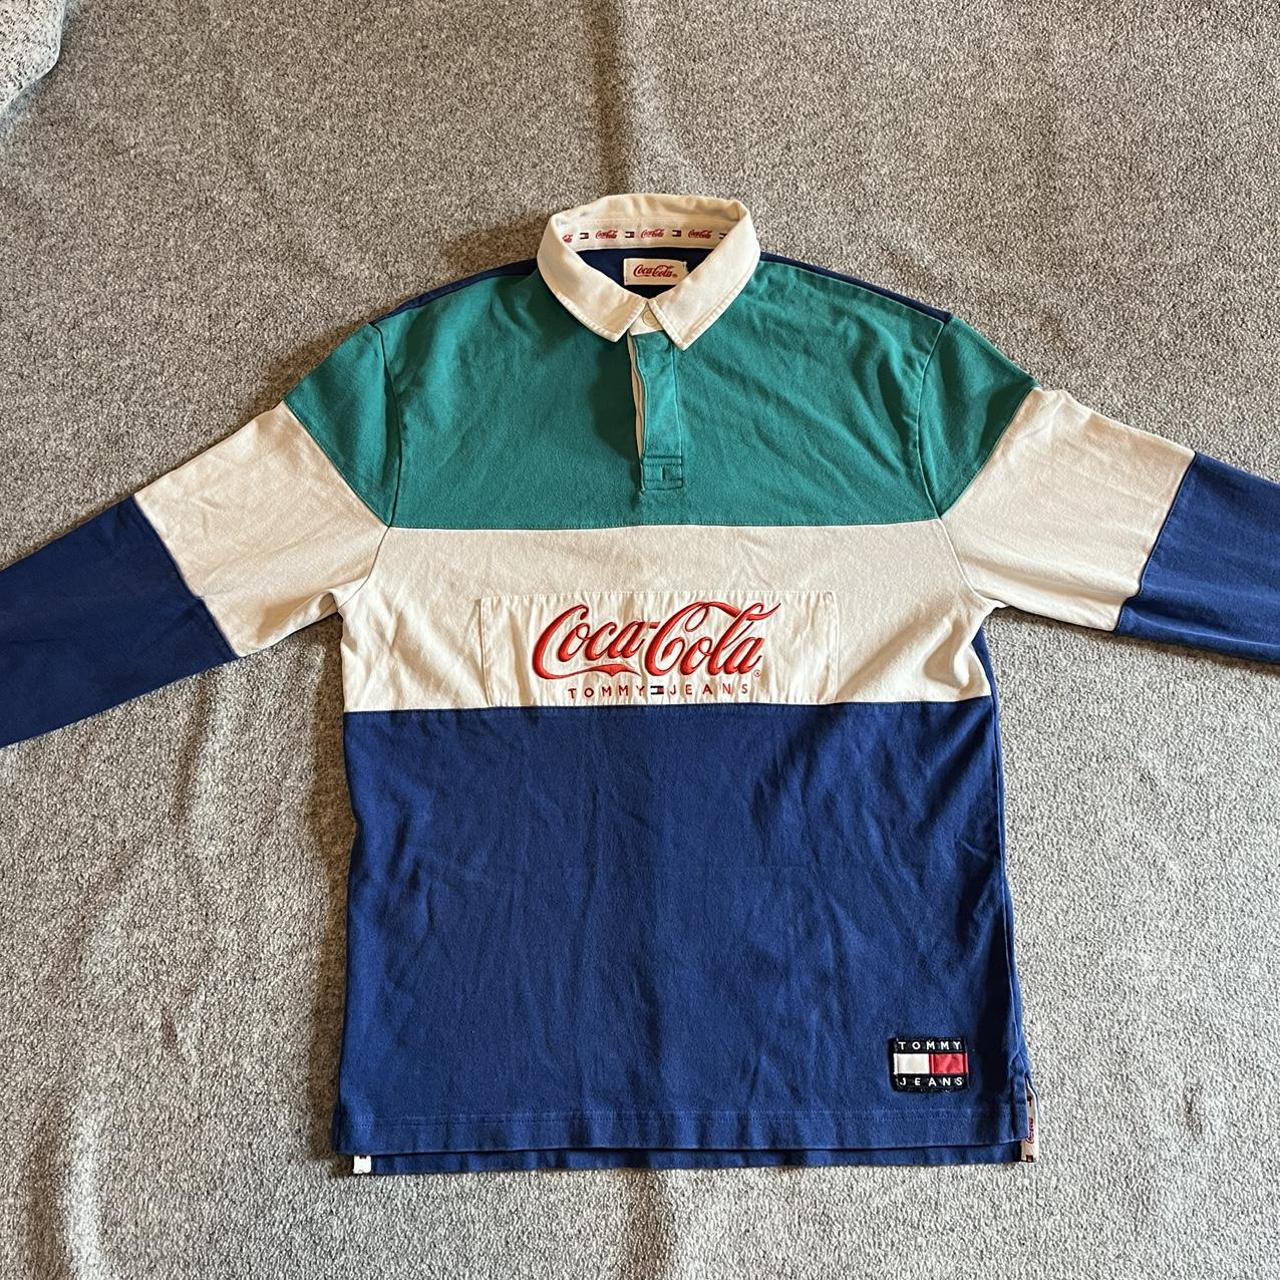 Jeans x Cola rugby shirt 2019 limited run... Depop